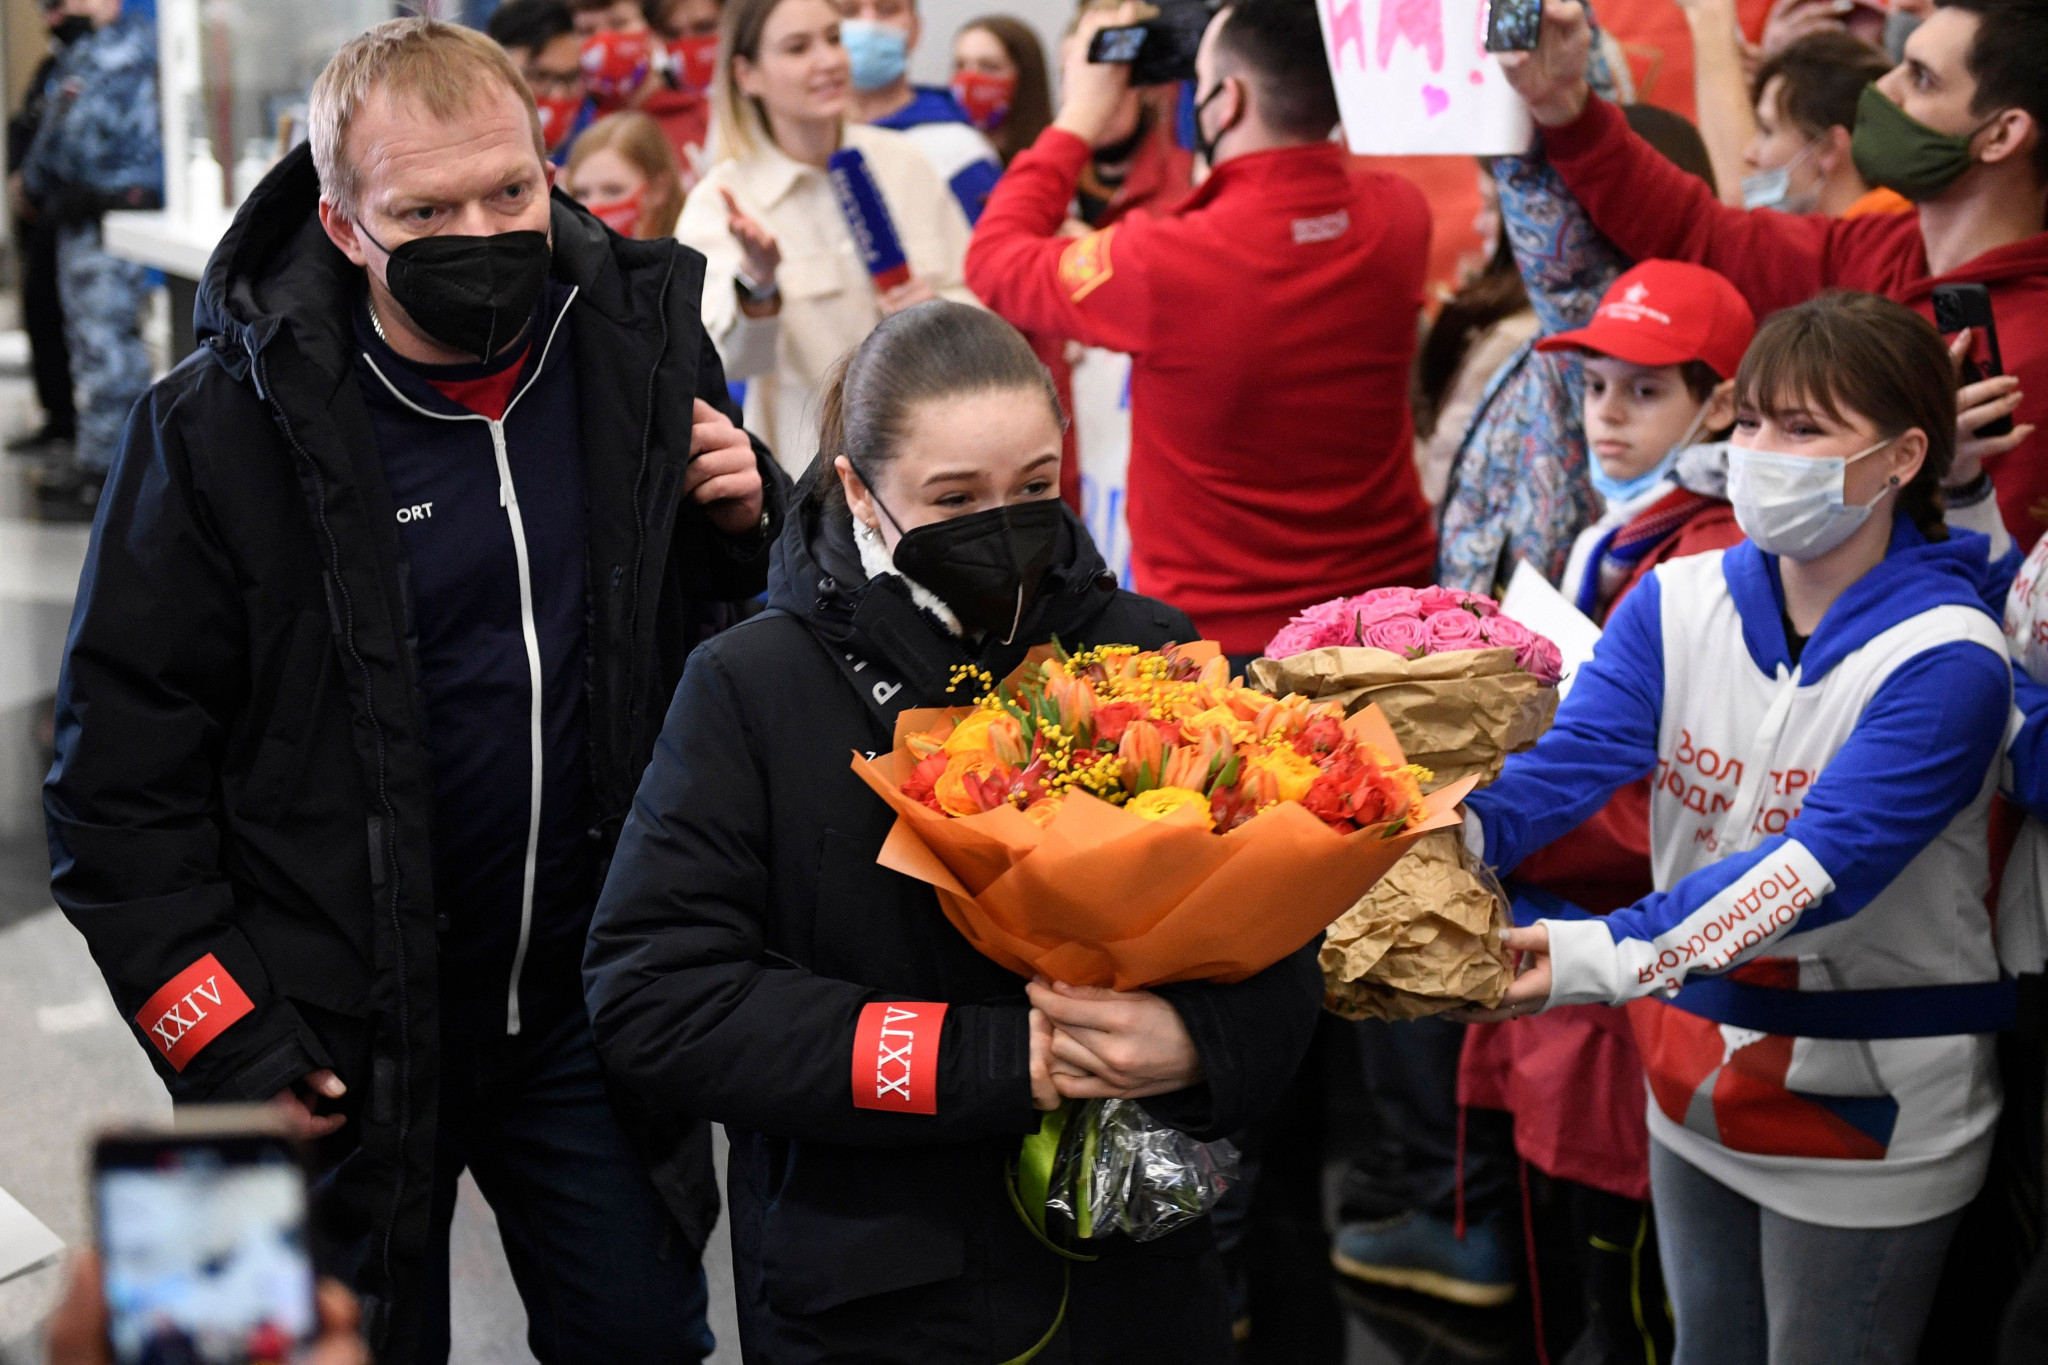 Kamila Valieva returned home to Moscow yesterday following the Winter Olympics in Beijing, being met by fans upon her arrival ©Getty Images